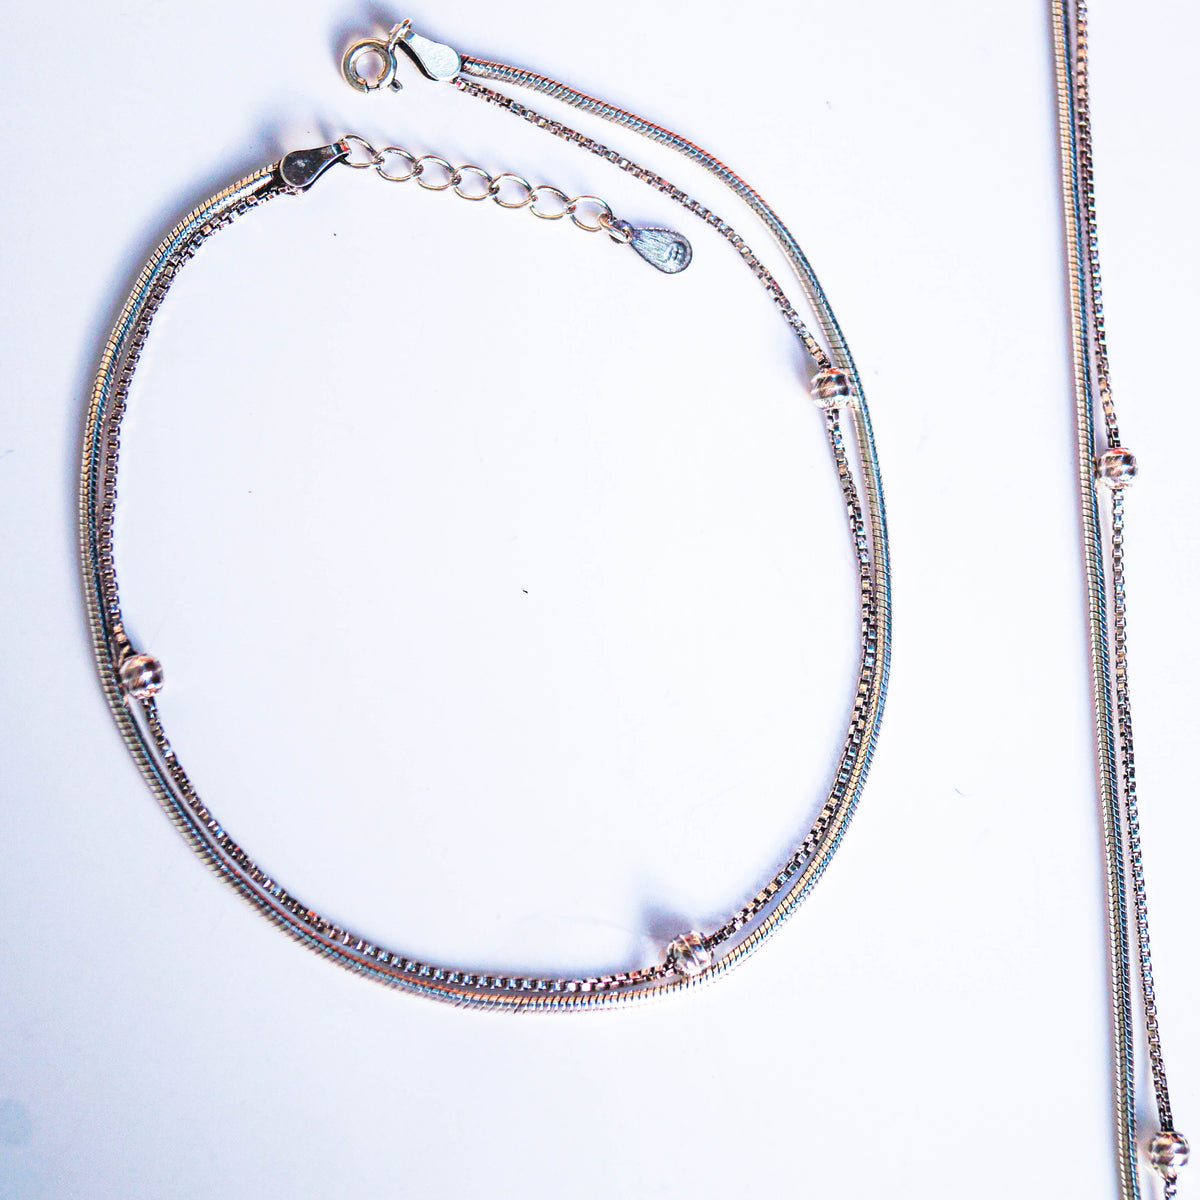 Duo Chain with Beads Anklet (Pair)